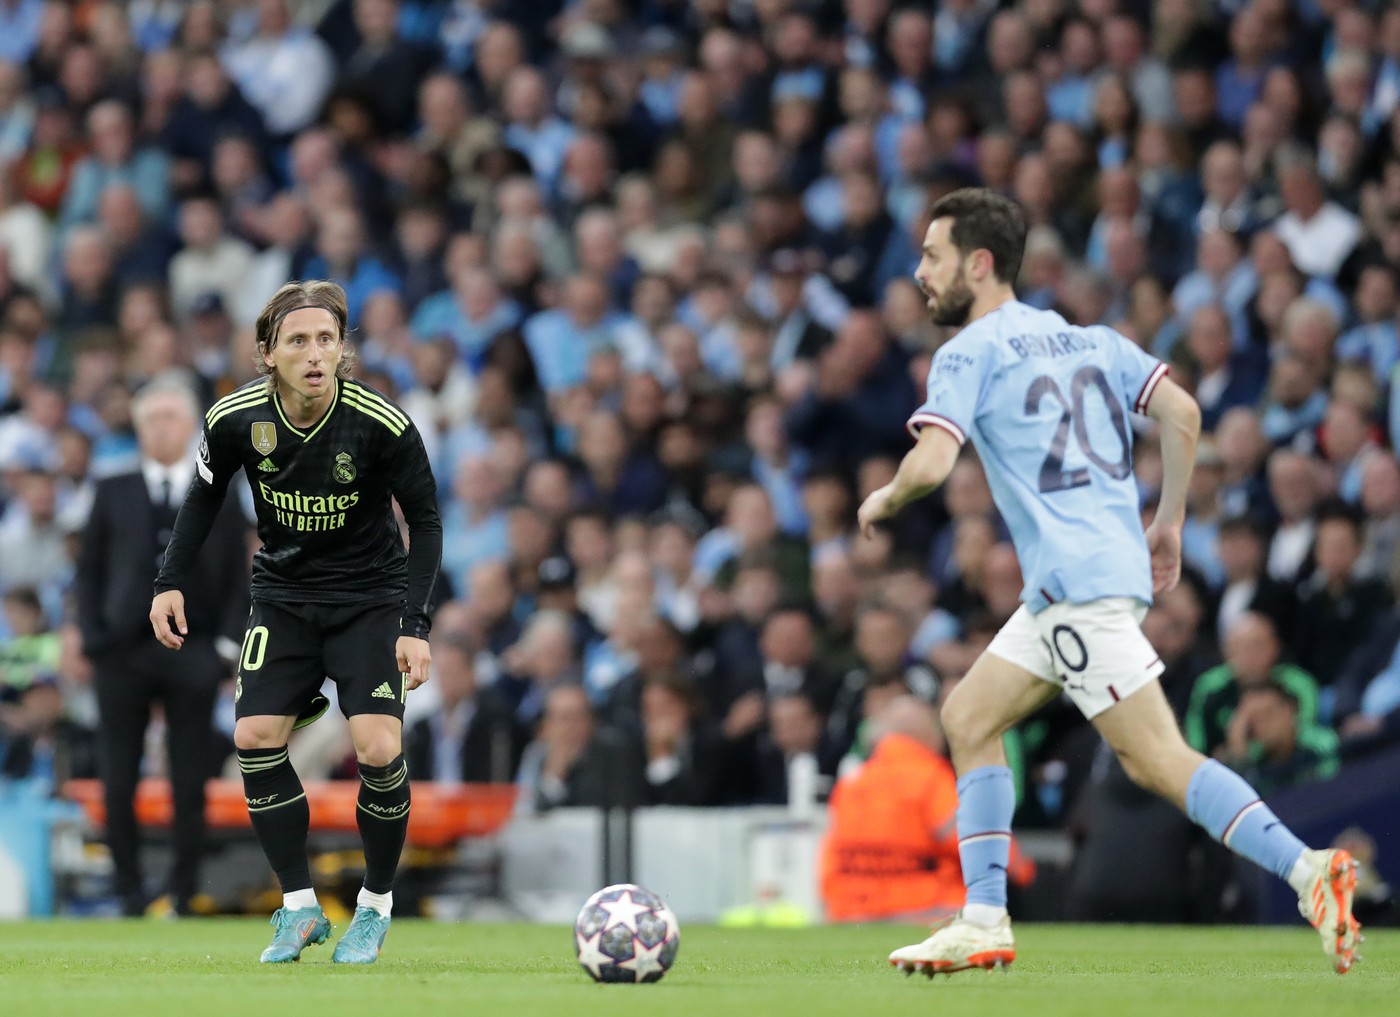 17th May 2023; Etihad Stadium, Manchester, England; Champions League Football, Semi Final Second Leg, Manchester City versus Real Madrid; Luka Modric of Real Madrid looks on as Bernardo Silva of Manchester City runs with the ball,Image: 777154741, License: Rights-managed, Restrictions: , Model Release: no, Credit line: David Blunsden / Actionplus / Profimedia